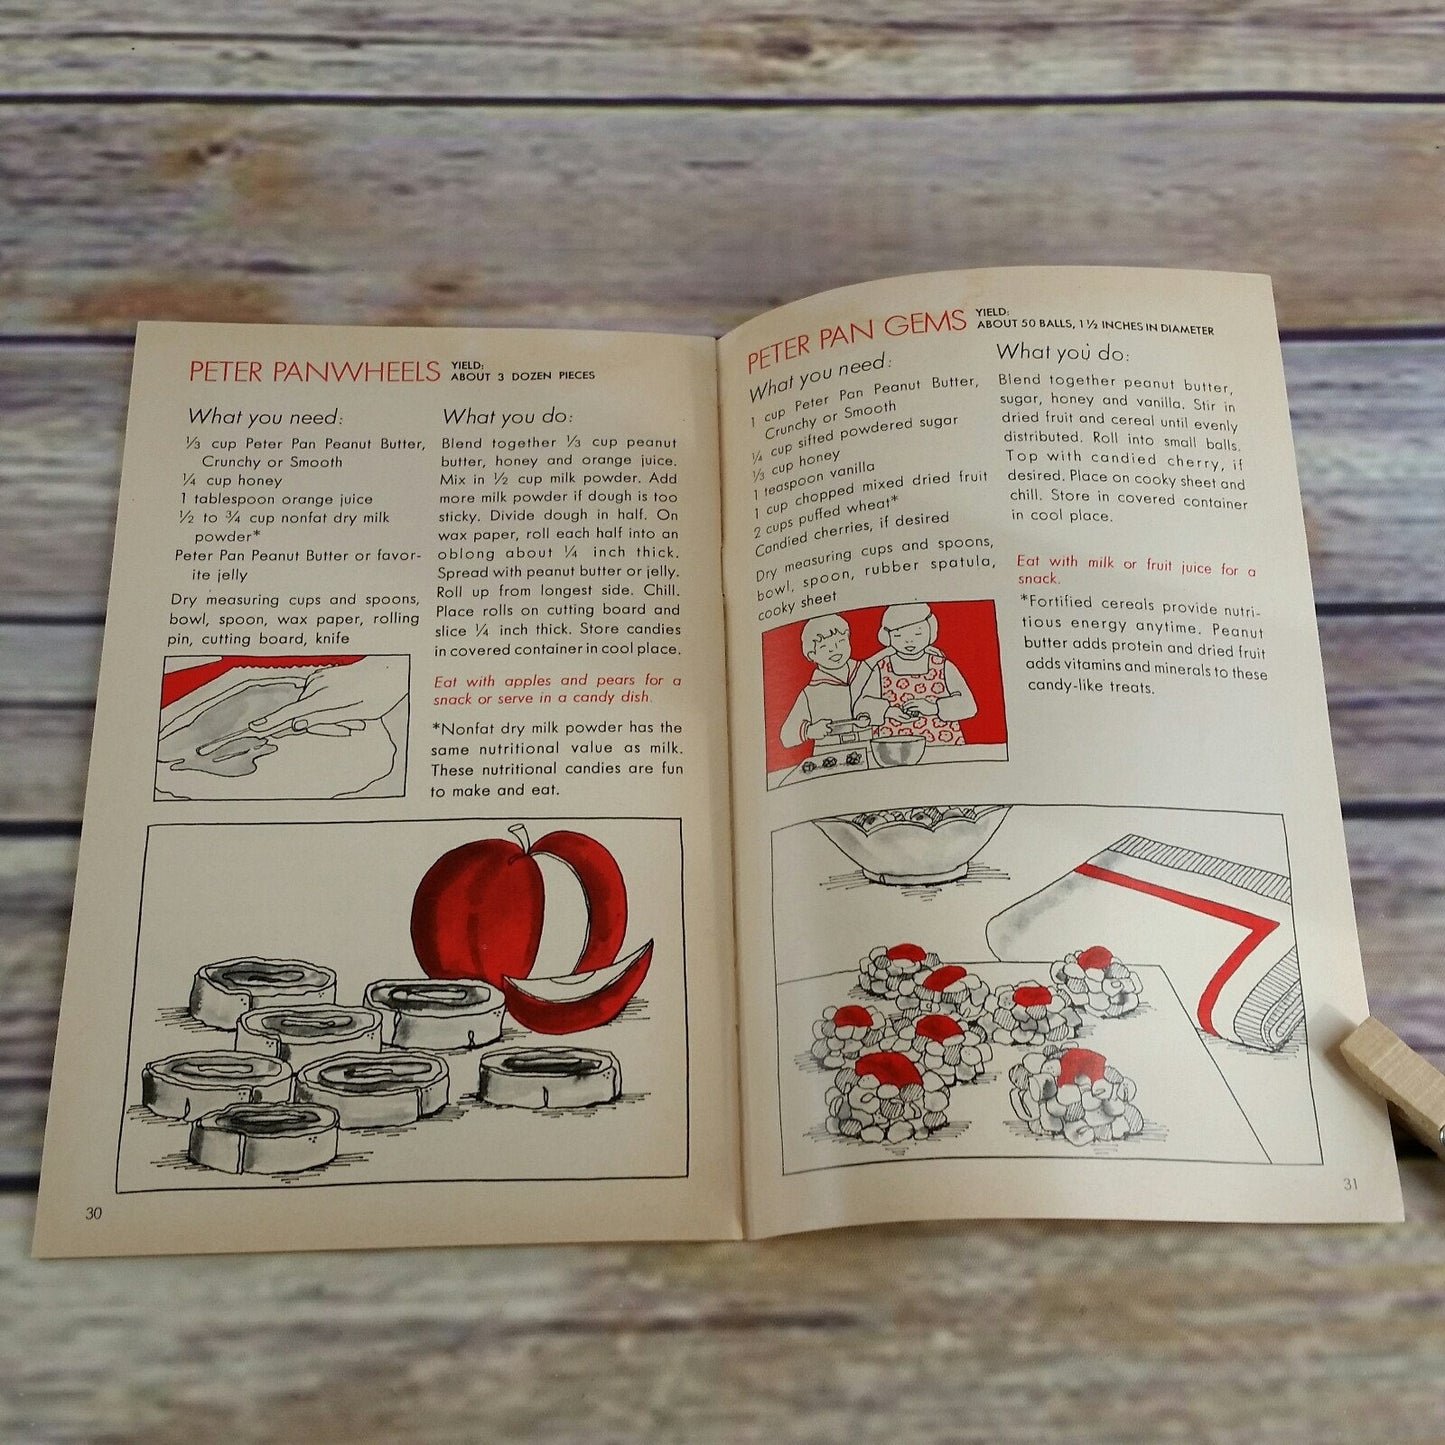 Vintage Kids Cookbook You and Peter Pan in the Kitchen Peanut Butter Recipes Promo Booklet Promo Recipes Ads 1970s 1980s